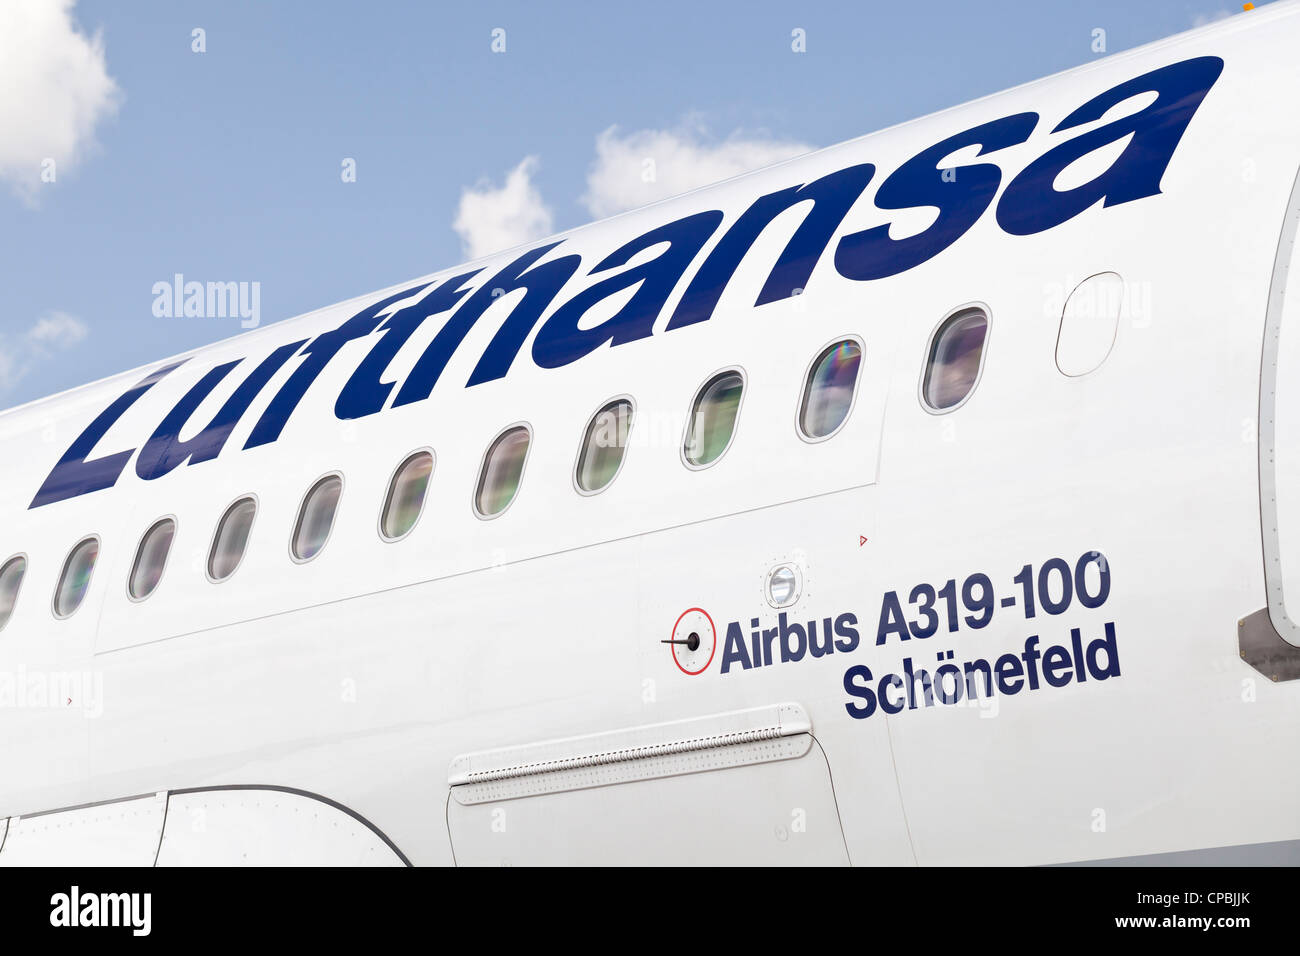 Detail of a Lufthanse Airbus A319-100 airplane Stock Photo